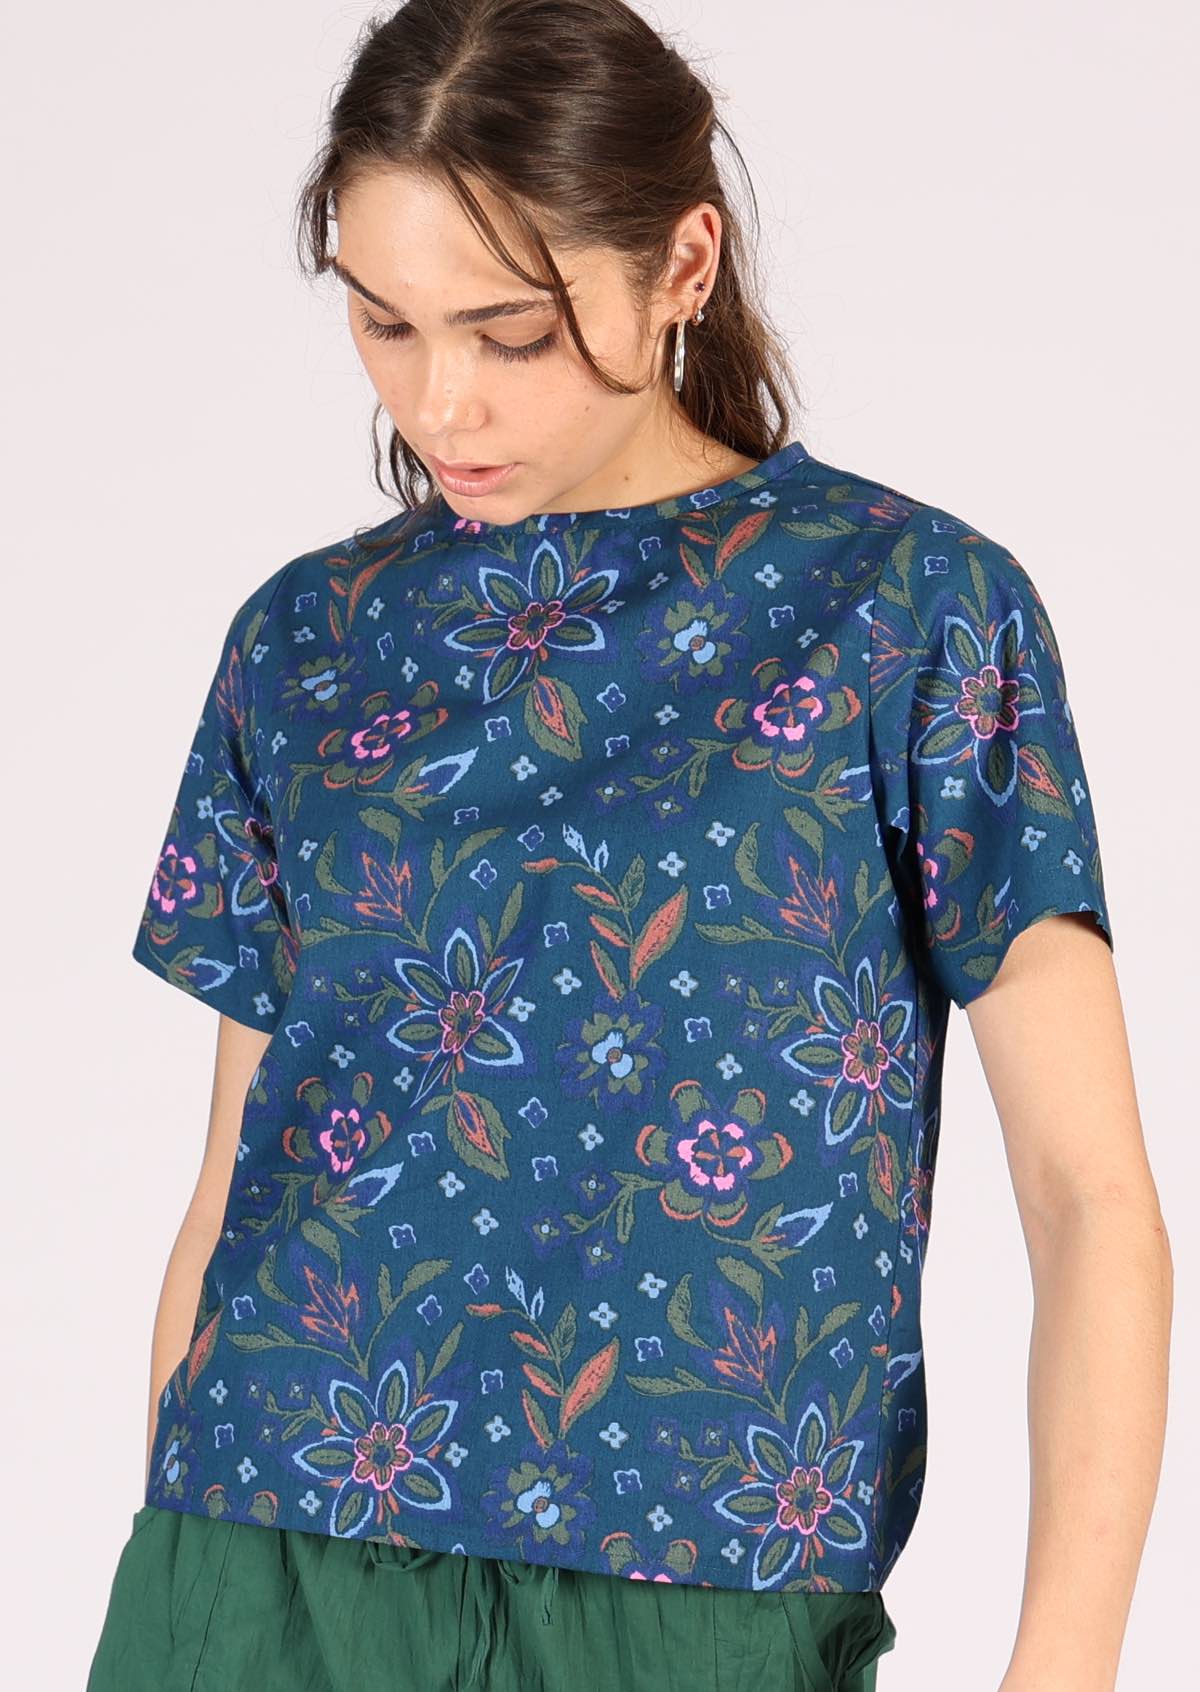 Blue based cotton top has a decorative floral pattern with green, orange and pink. 